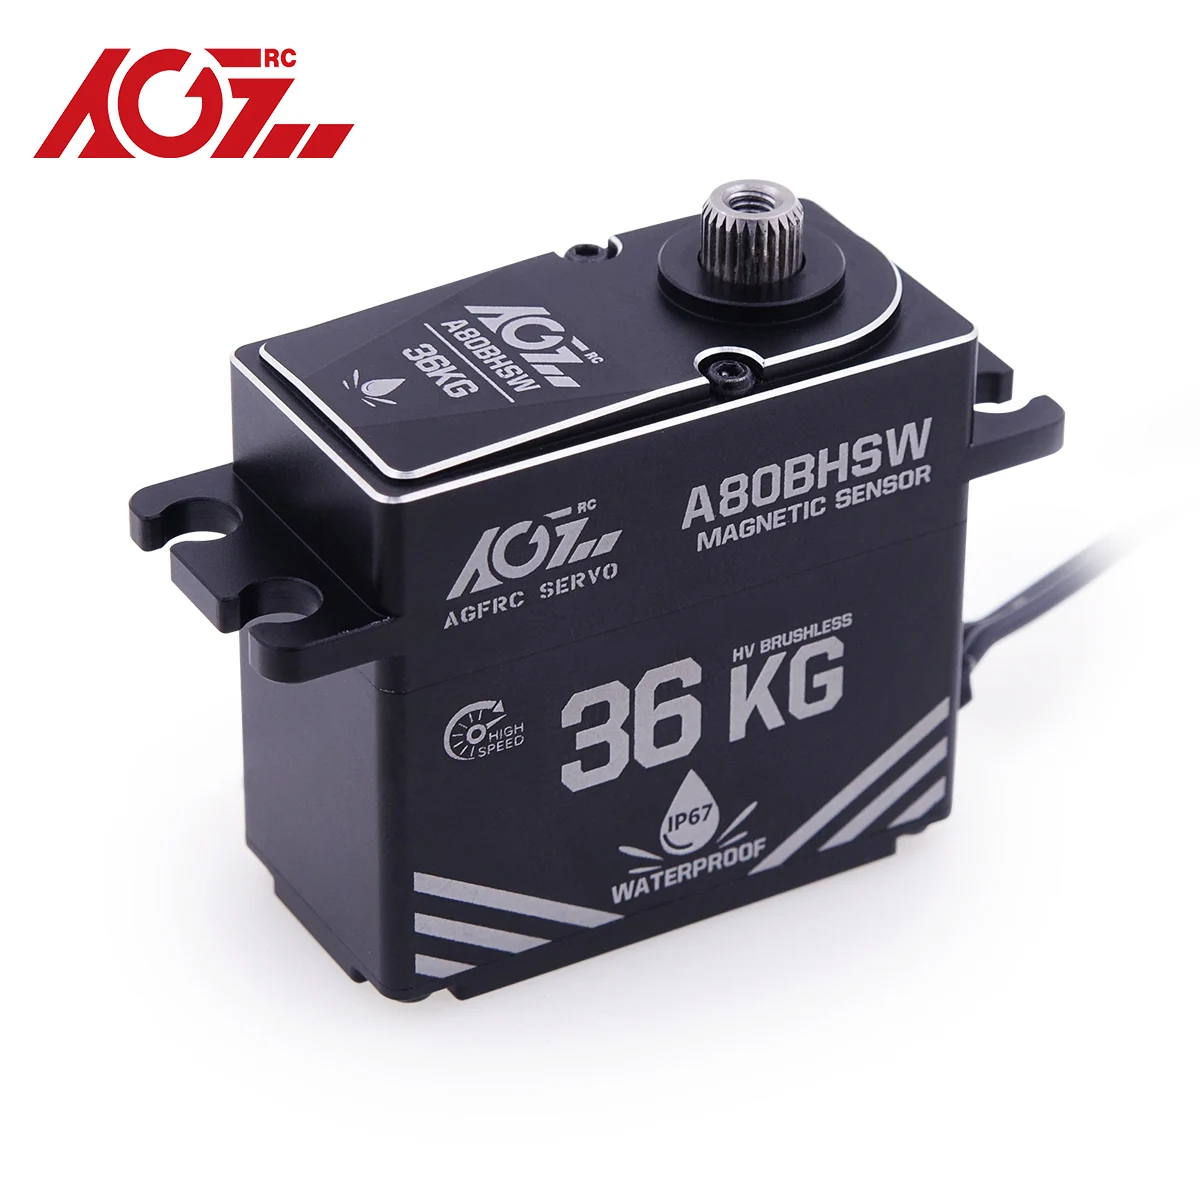 Special Offer -AGFRC A80BHSW HV 36KG Torque 0.071Sec Waterproof IP67 Brushless - £125.00 GBP